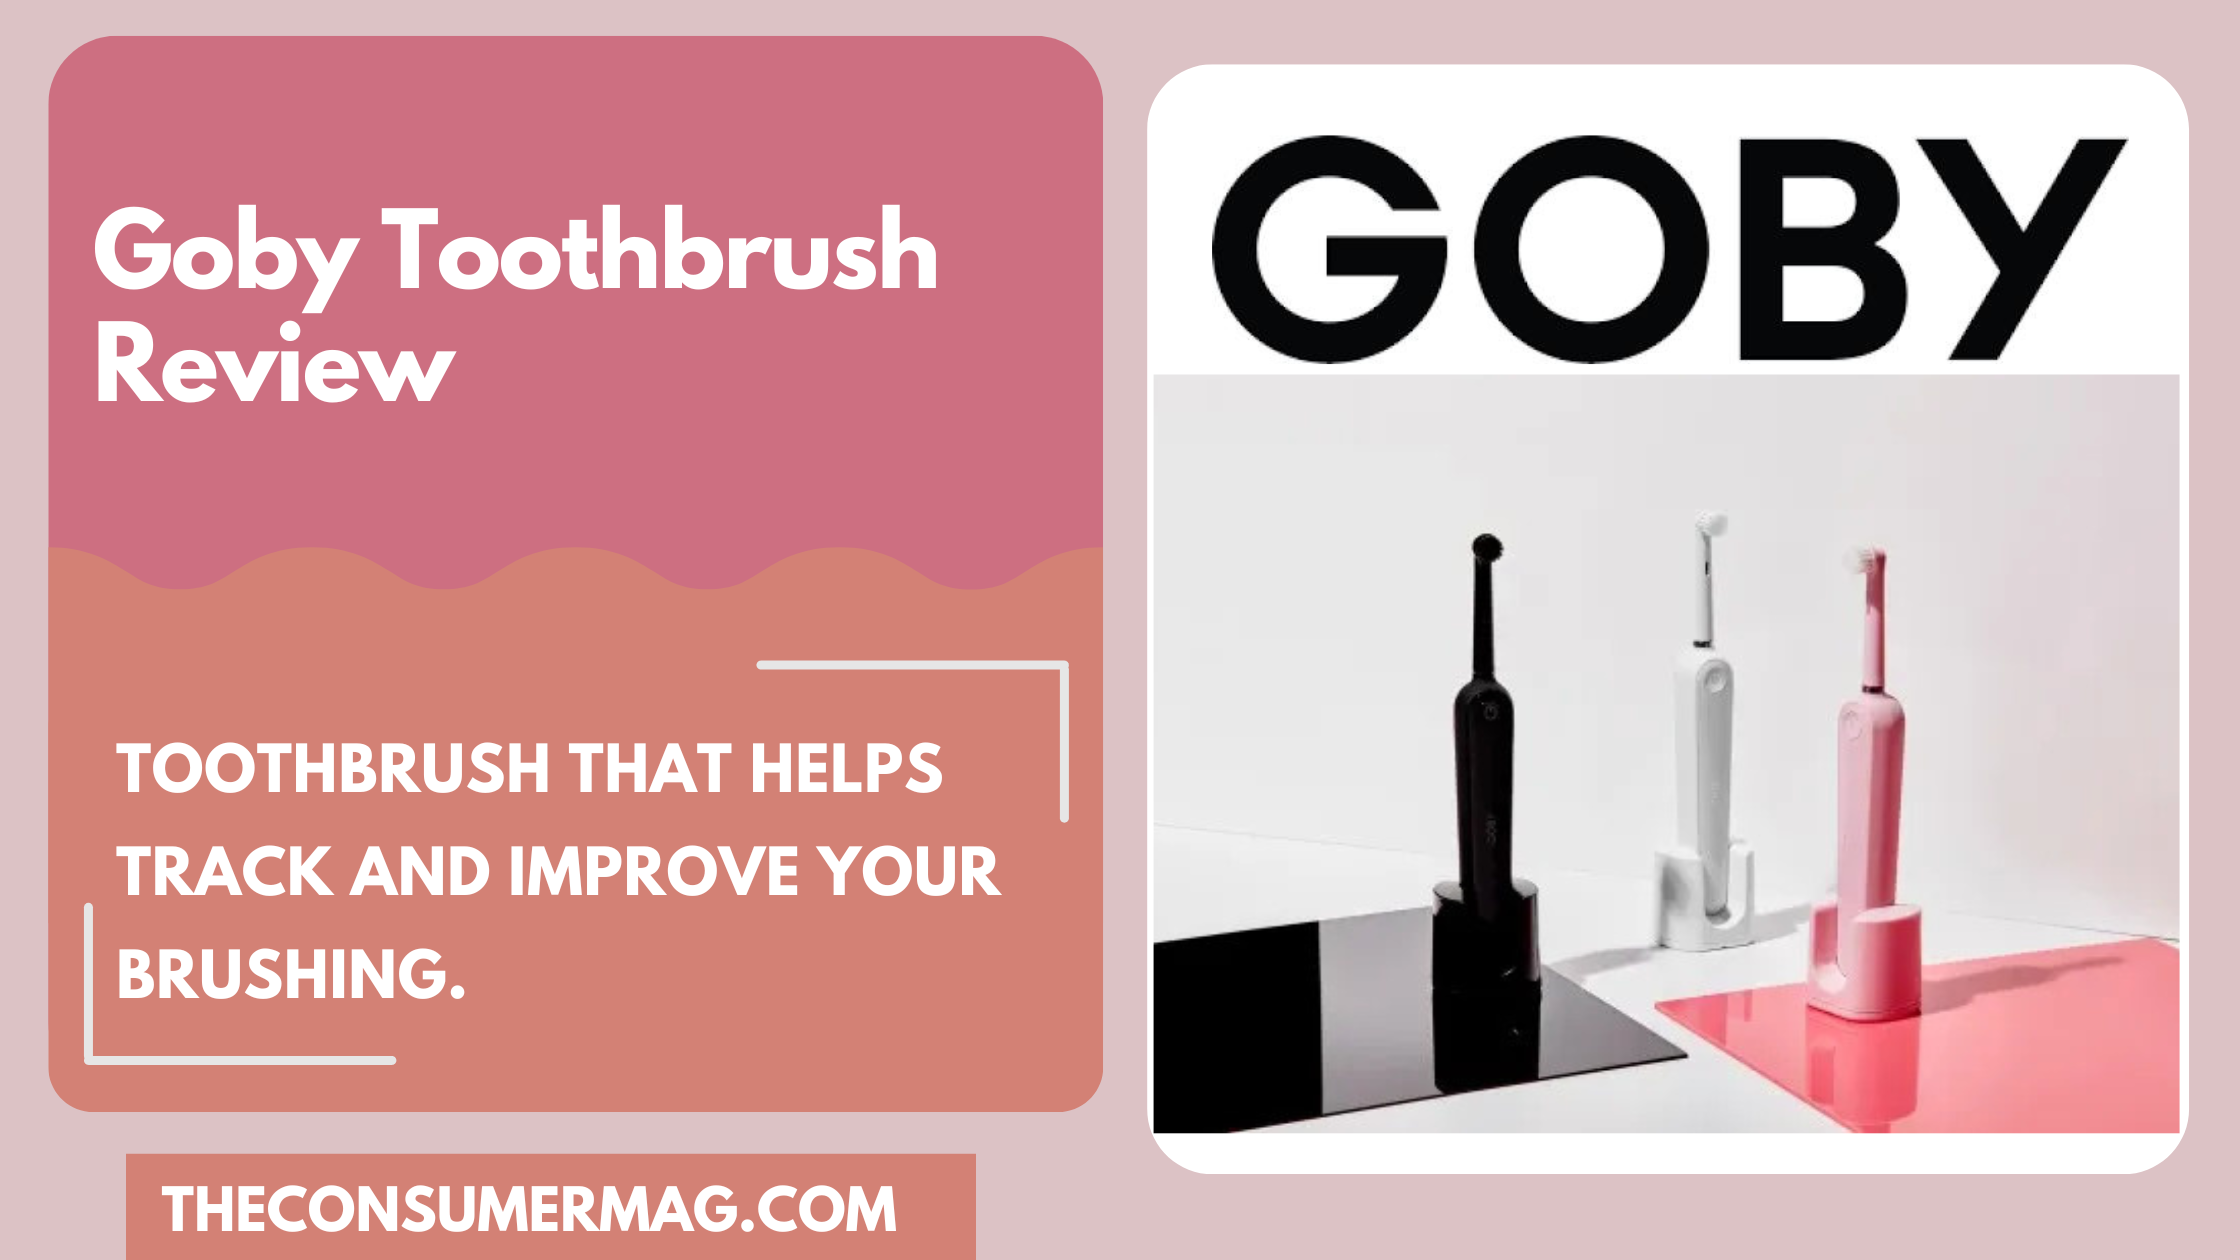 Goby Toothbrush Review 2023: Read Goby Toothbrush Reviews